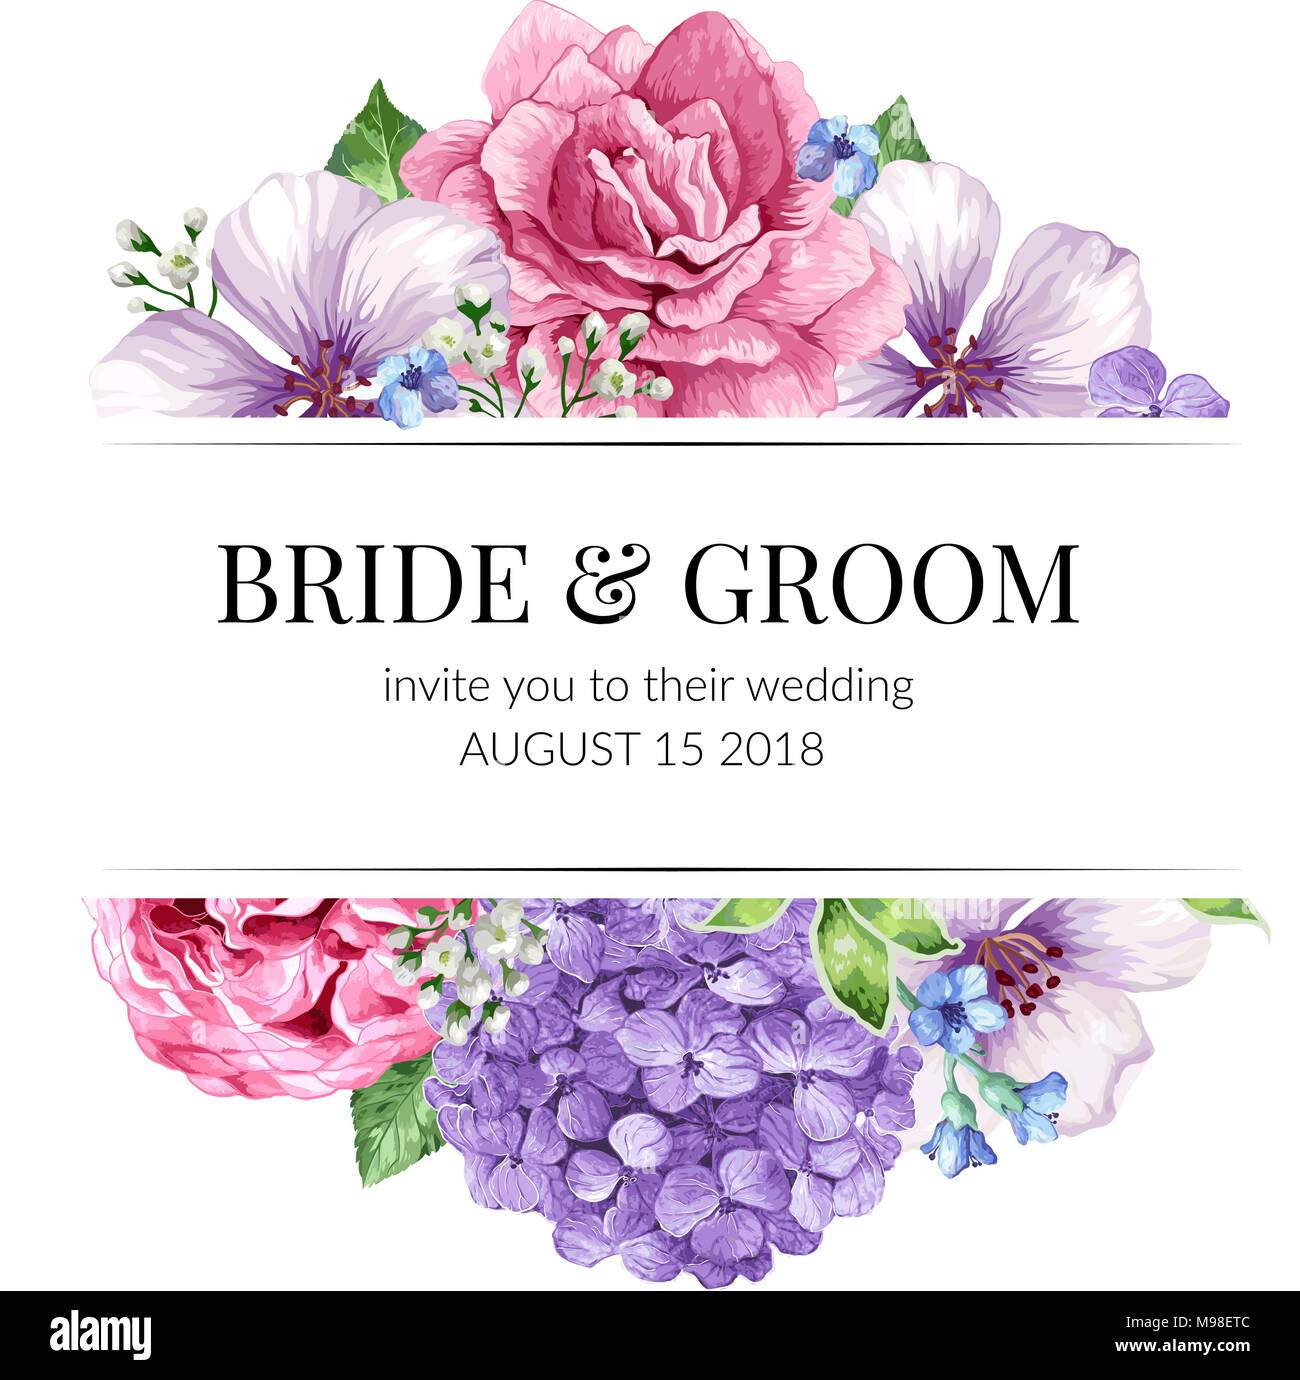 Wedding Invitation Card Design With Flowers In Watercolor Style On